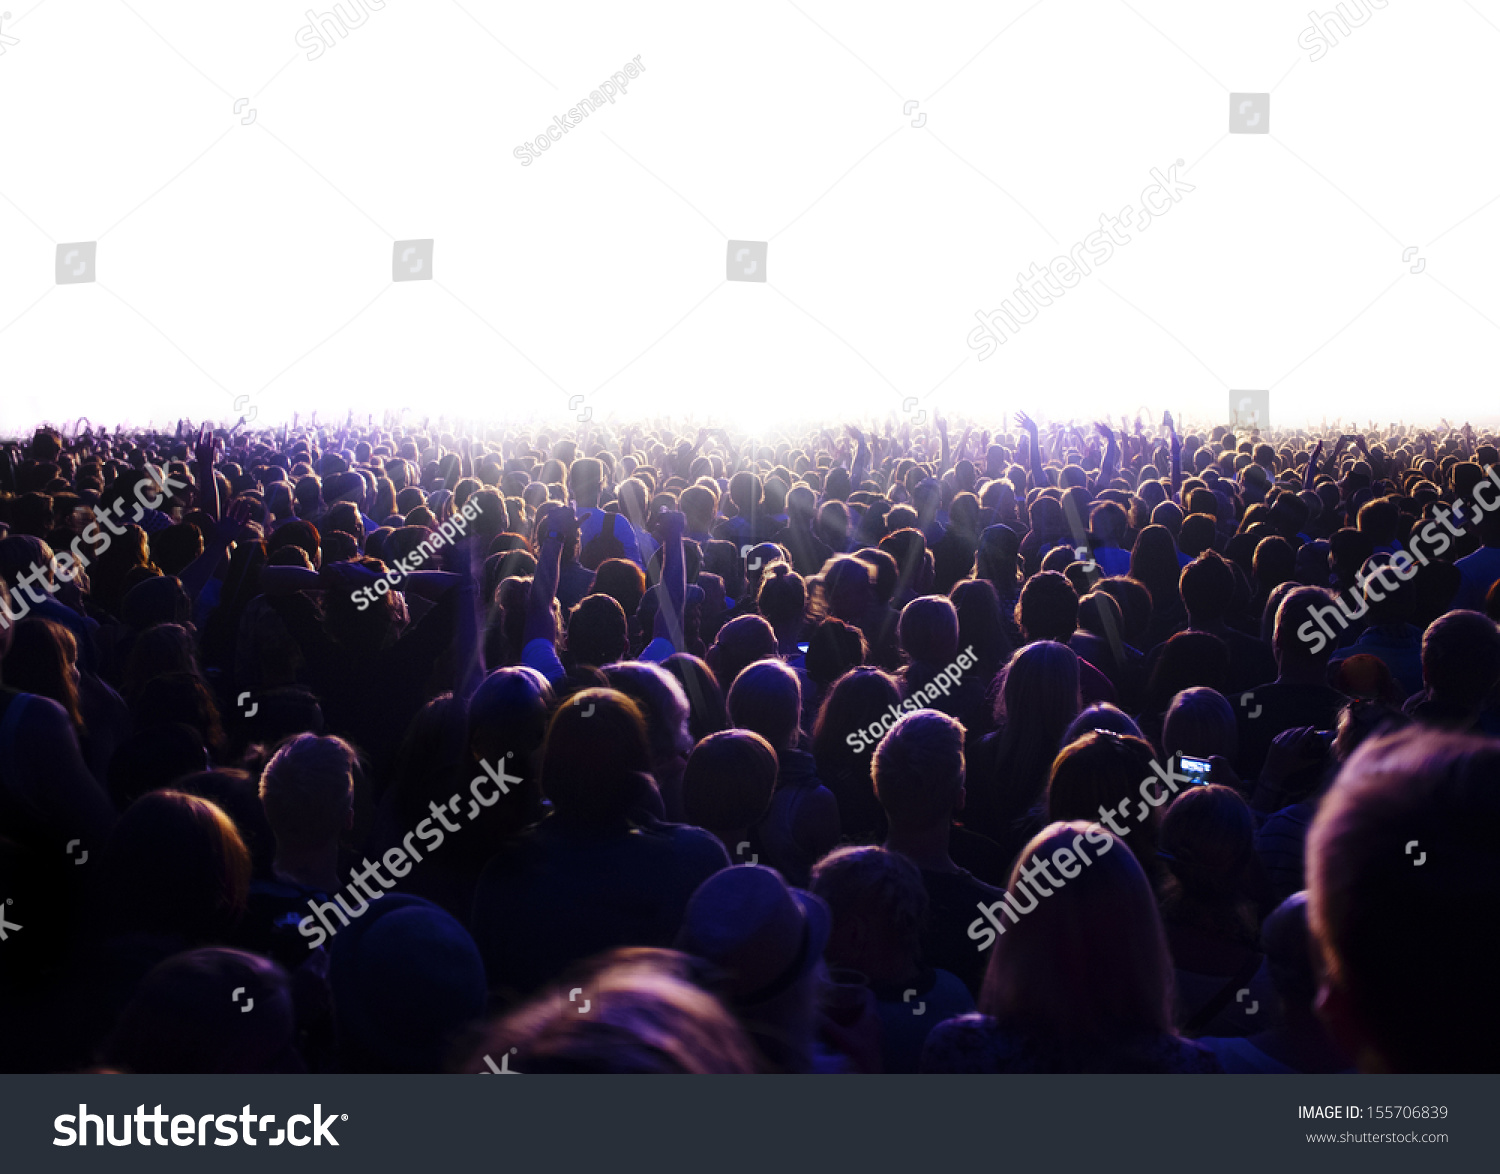 Audience is watching a luminous surface. #155706839